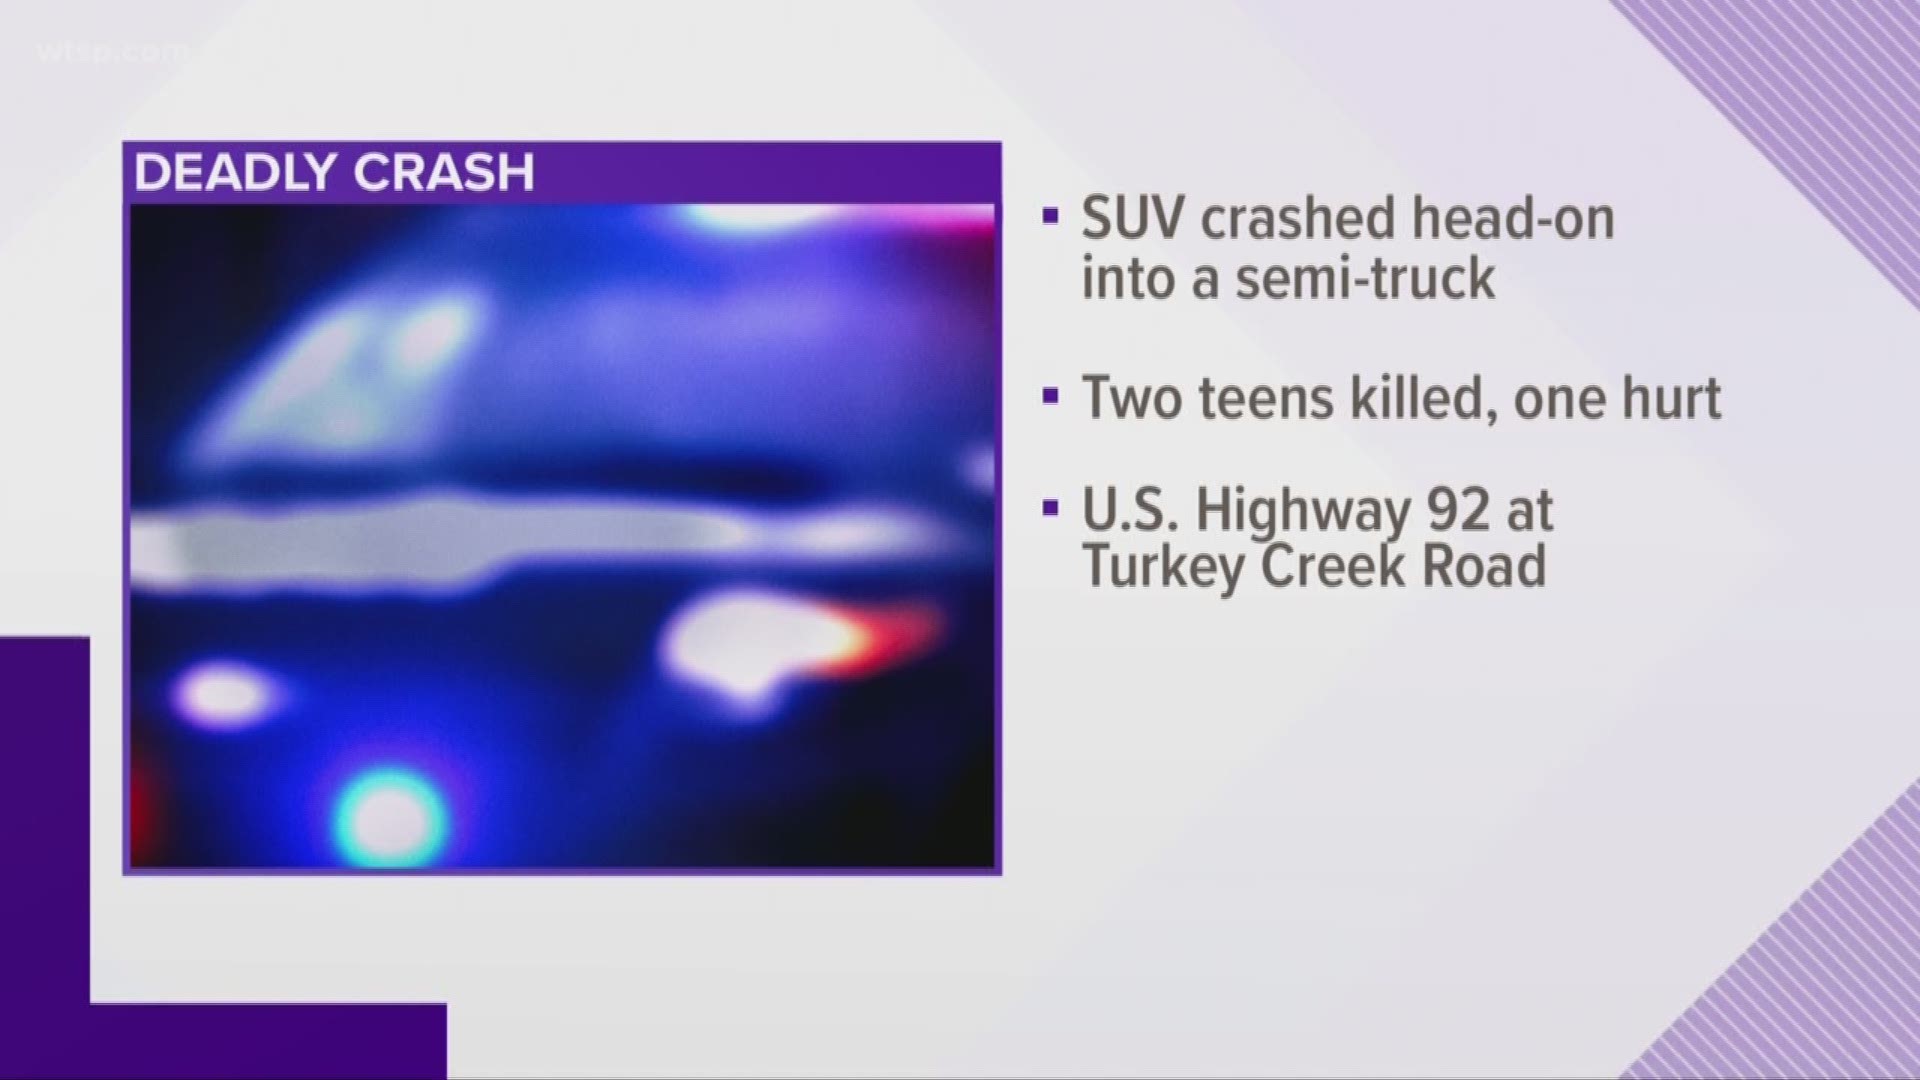 Two teenagers were killed and another hurt after the SUV they were riding in crashed head-on into a semi-truck.